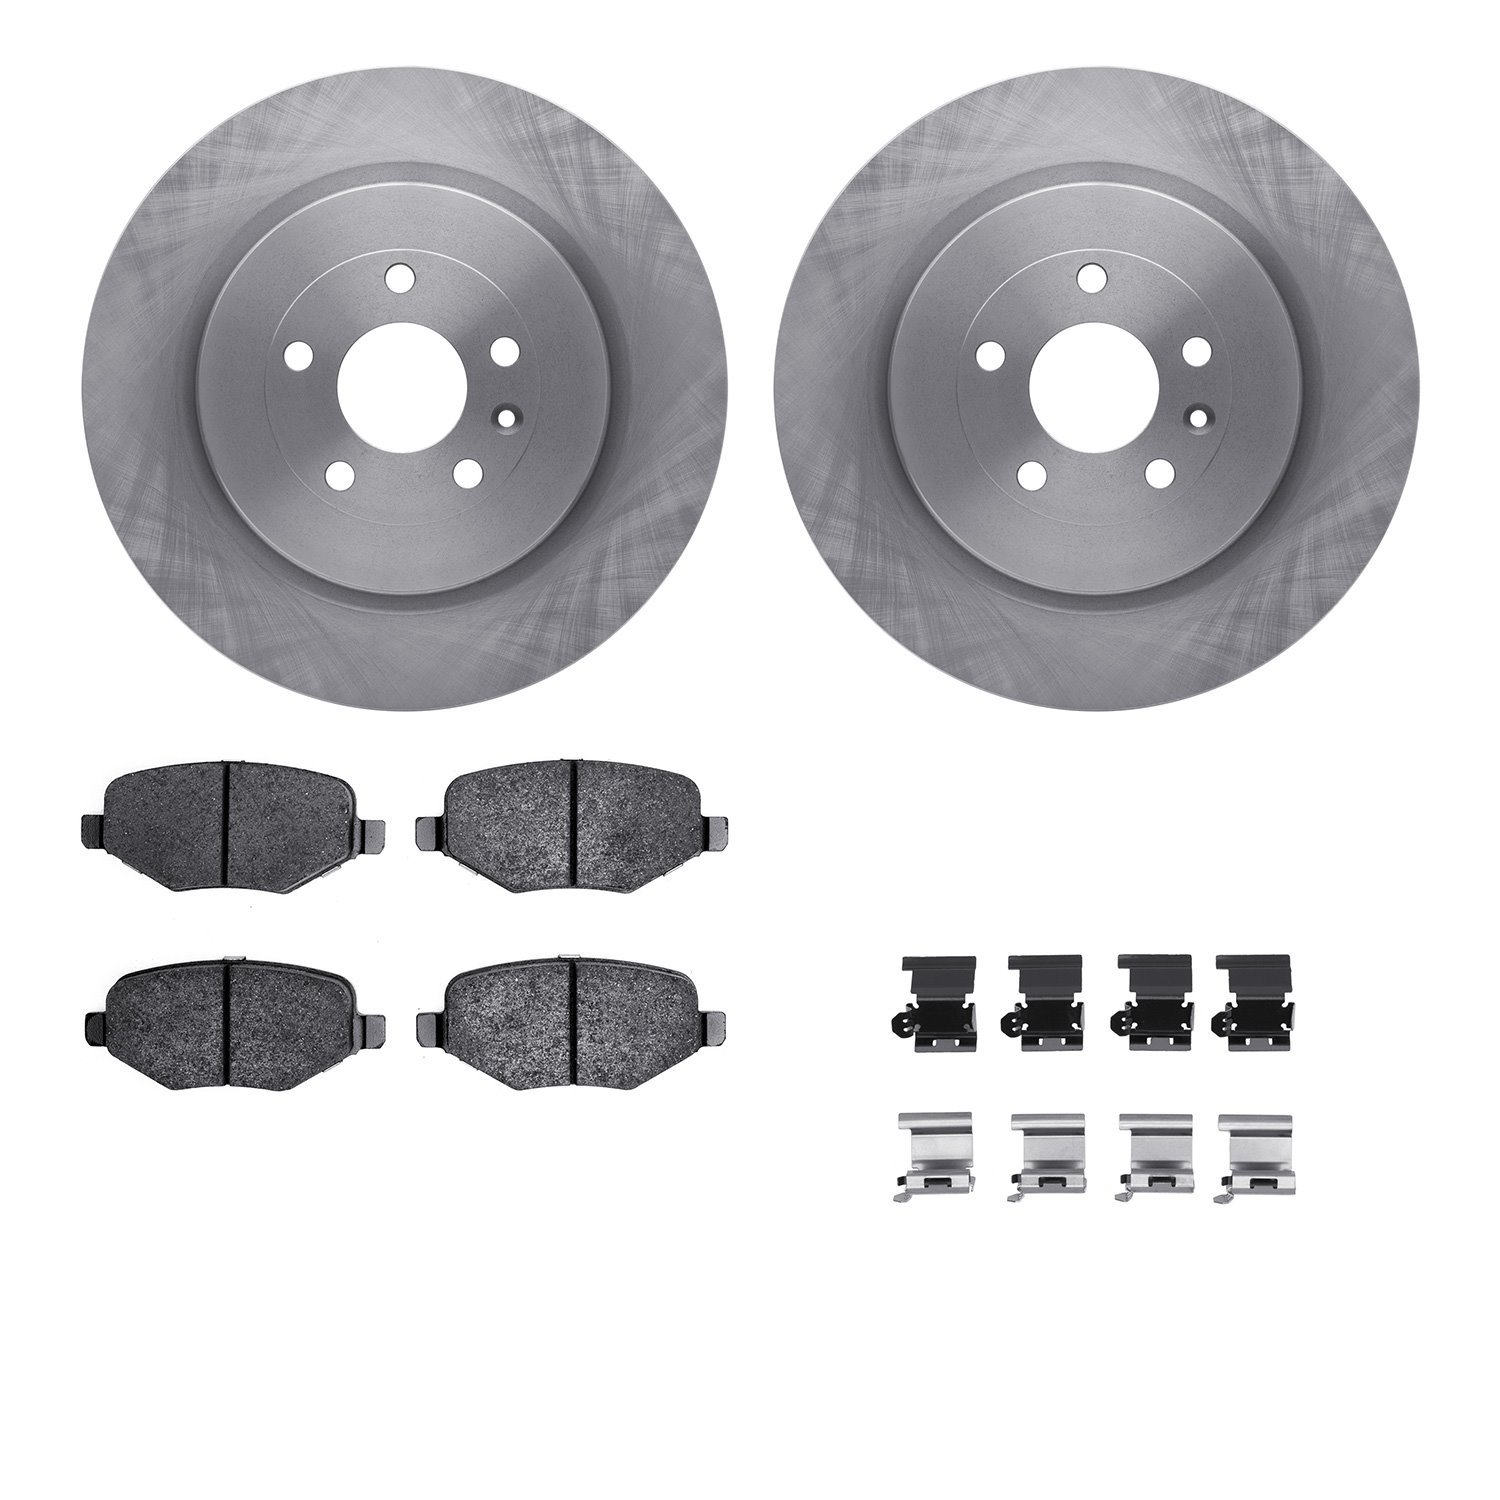 6312-54195 Brake Rotors with 3000-Series Ceramic Brake Pads Kit with Hardware, 2013-2016 Ford/Lincoln/Mercury/Mazda, Position: R